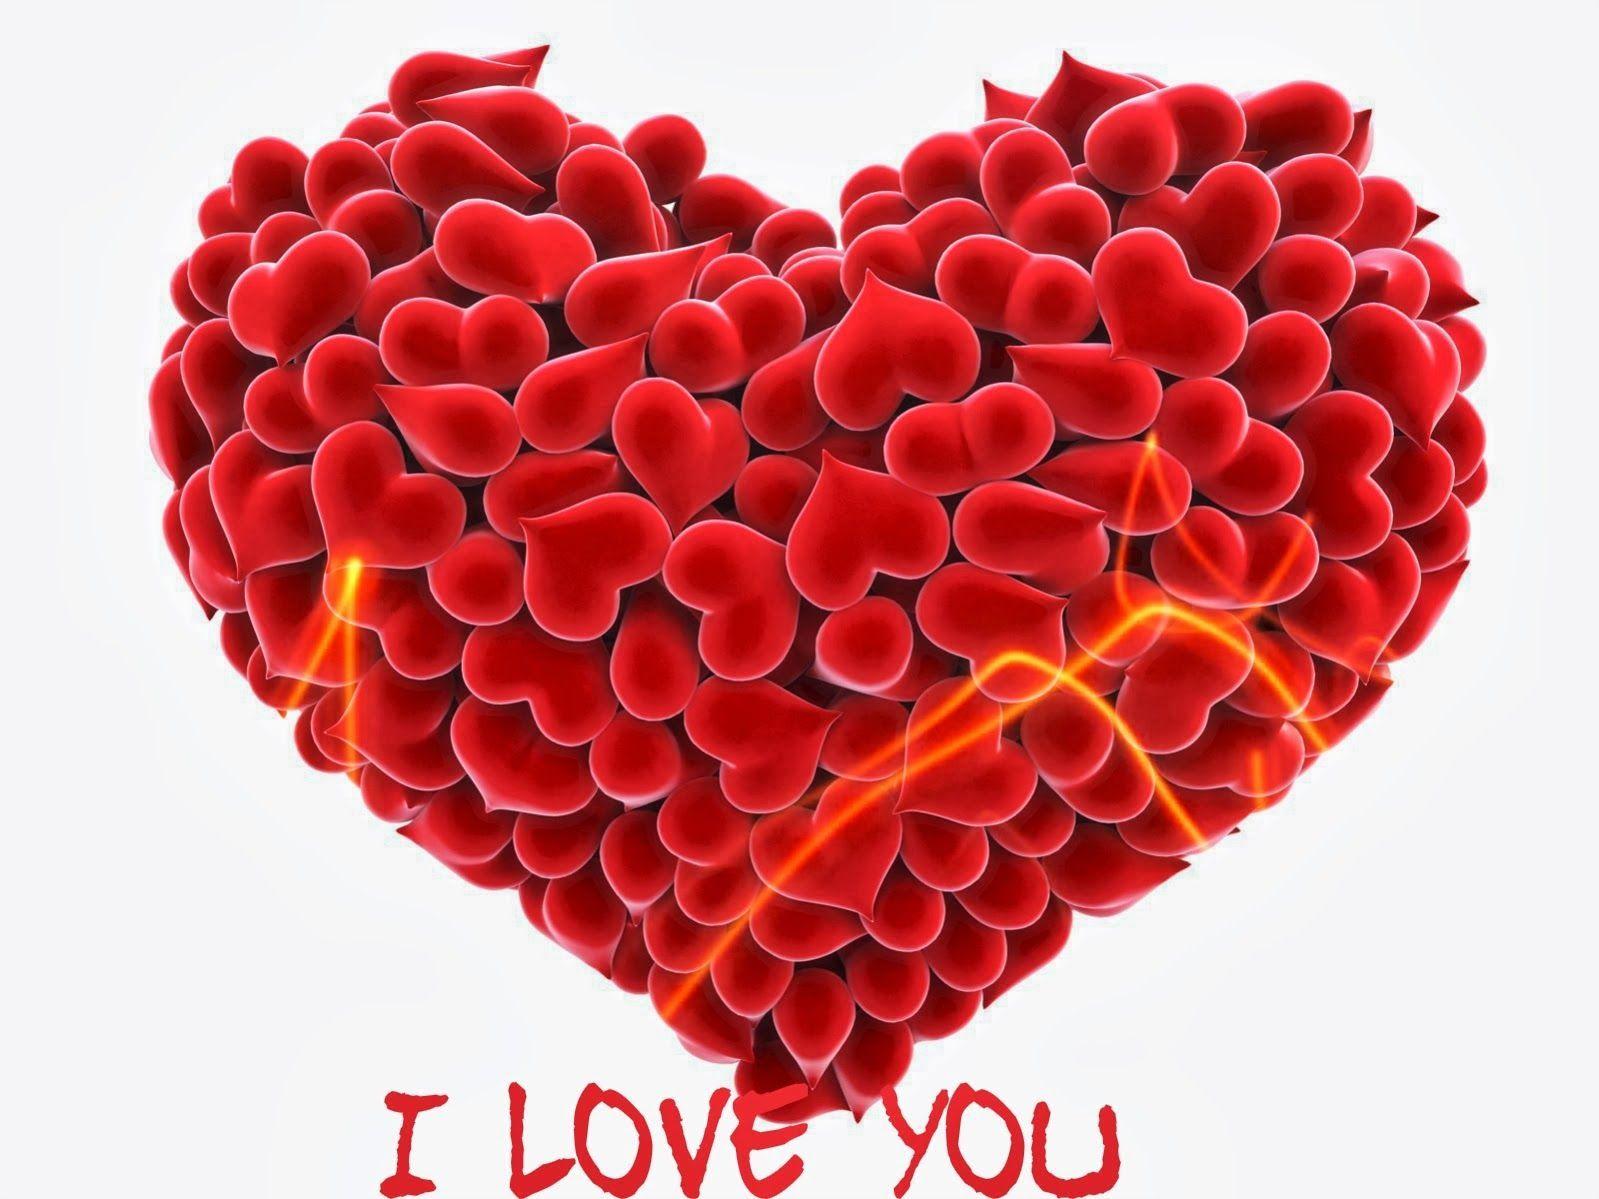 I Love You Wallpaper Android Apps on Google Play. HD Wallpaper